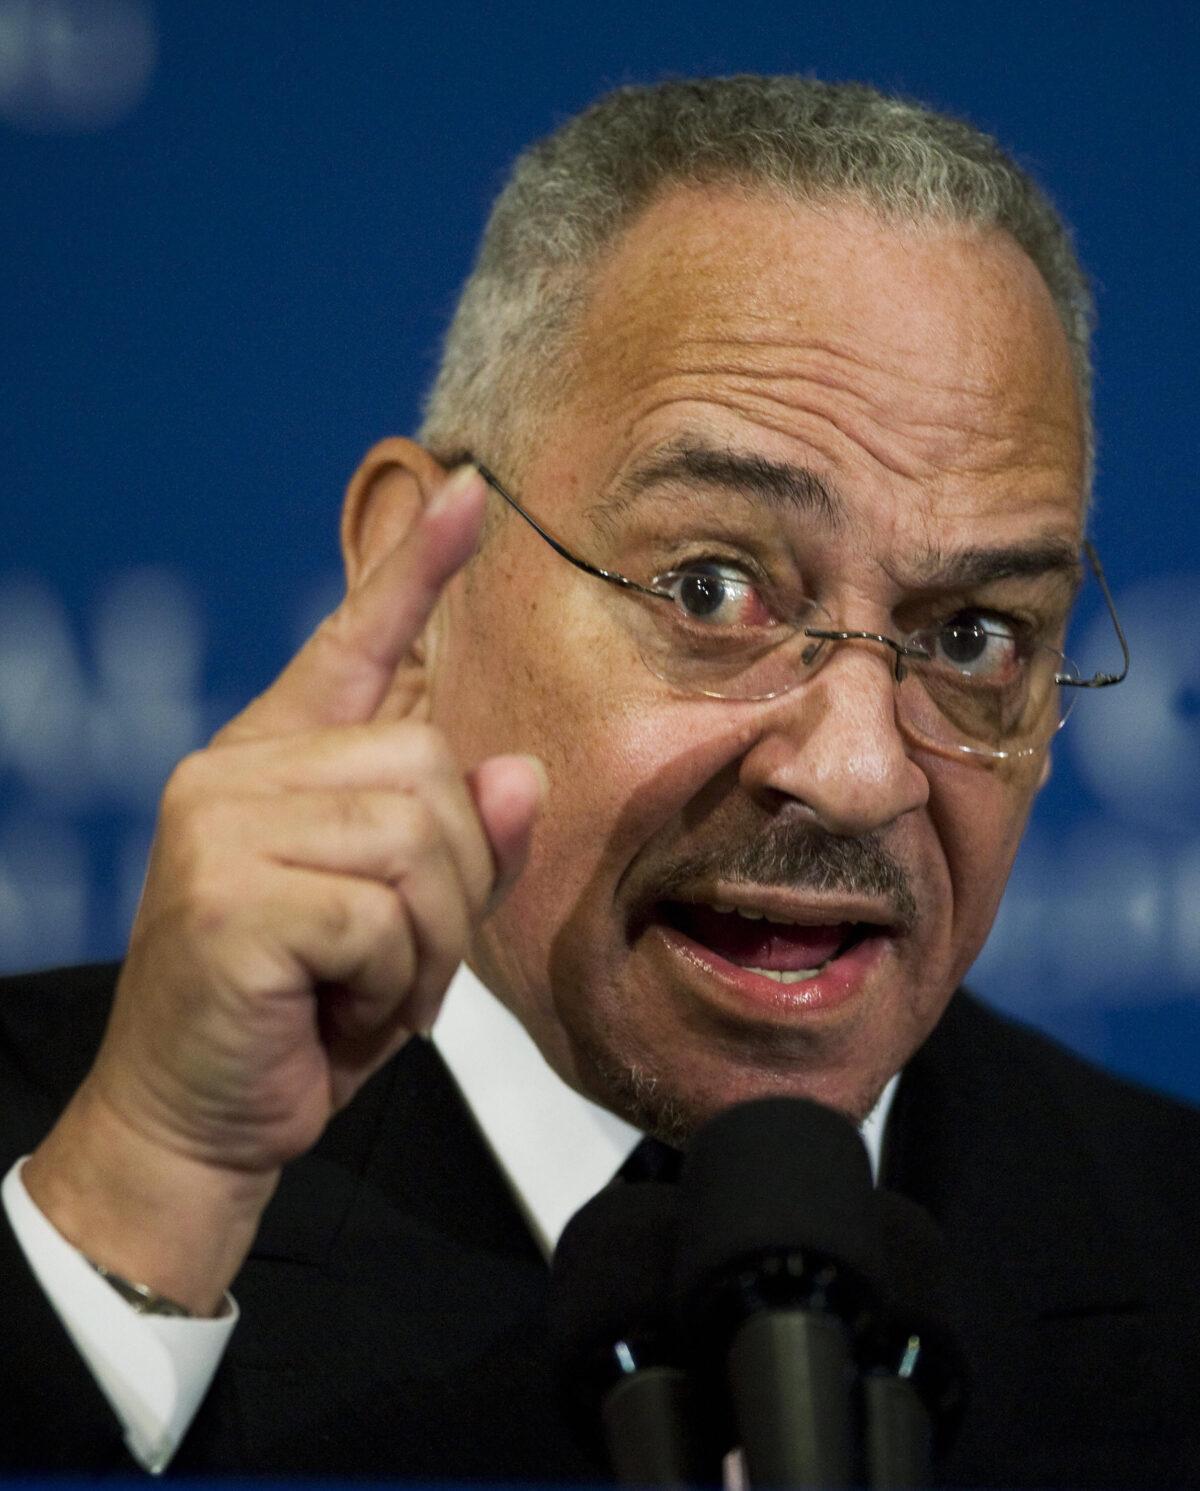 Jeremiah Wright, senior pastor of the Trinity United Church of Christ in Chicago, speaks during a breakfast program at the National Press Club on April 28, 2008, in Washington. (Mandel Ngan/AFP via Getty Images)